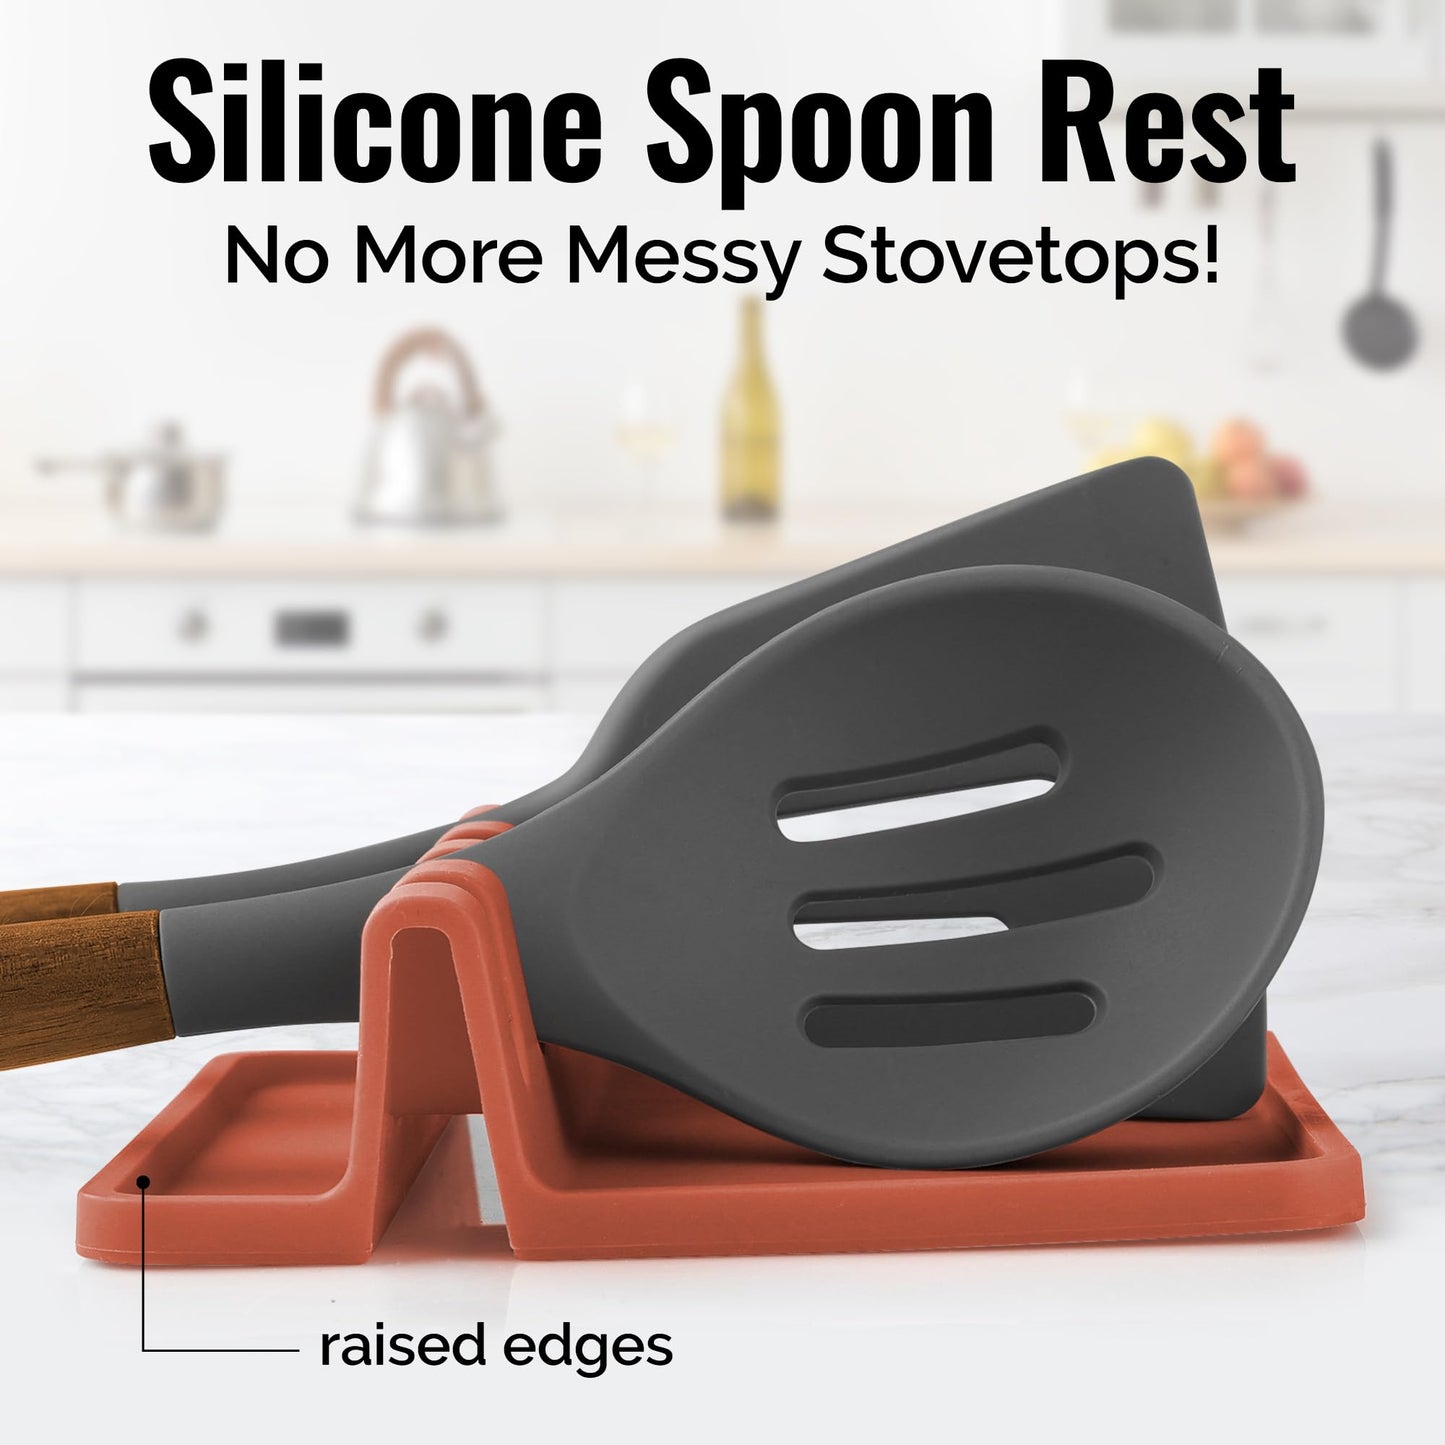 Zulay Kitchen Silicone Utensil Rest with Drip Pad for Multiple Utensils - BPA-Free, Heat-Resistant Spoon Rest & Spoon Holder for Stove Top - Kitchen Utensil Holder for Ladles & Tongs - Canyon Rose